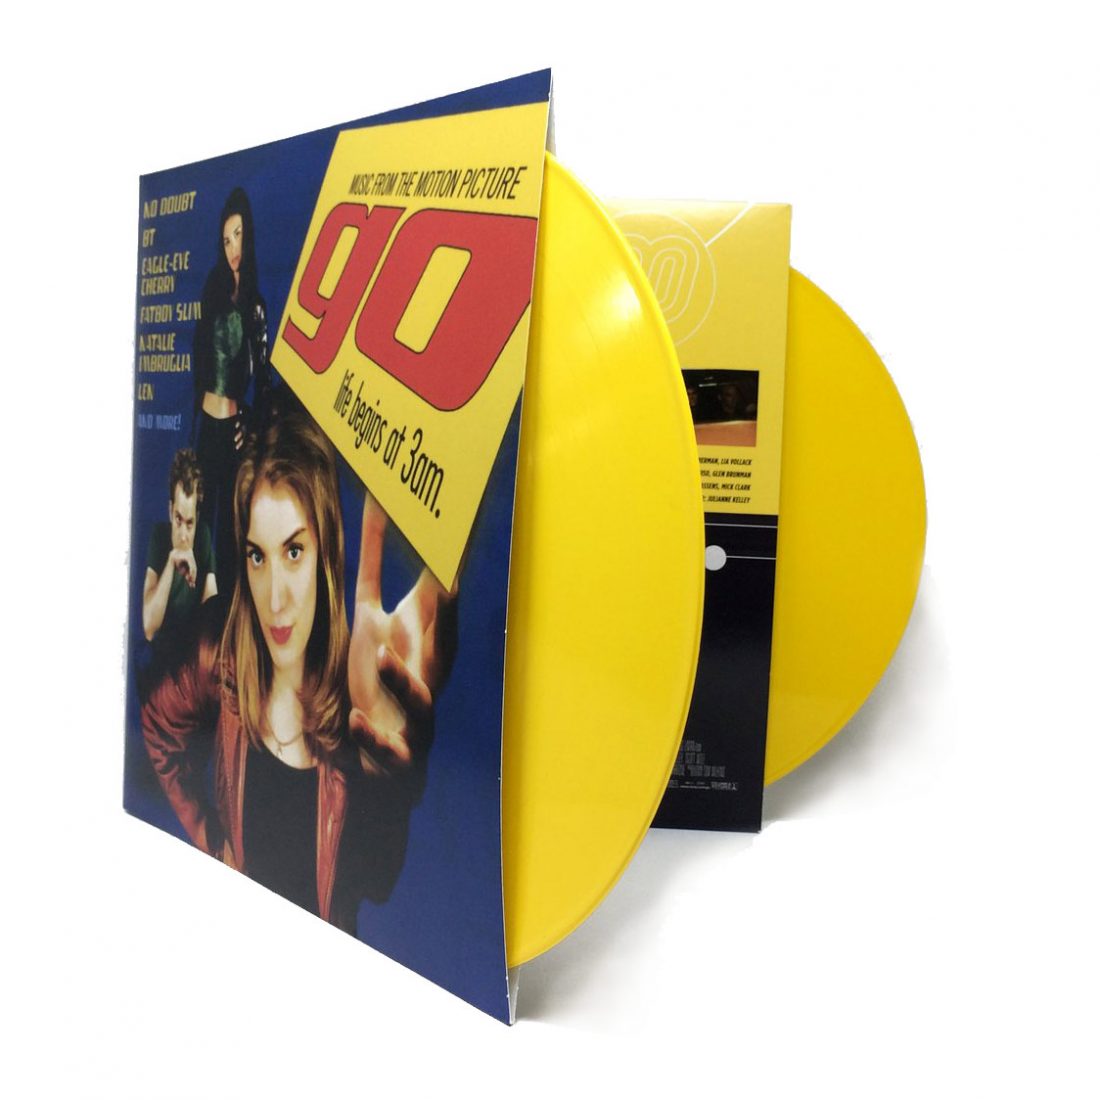 Go: Music from the Motion Picture Limited Yellow “Gopaque” Edition